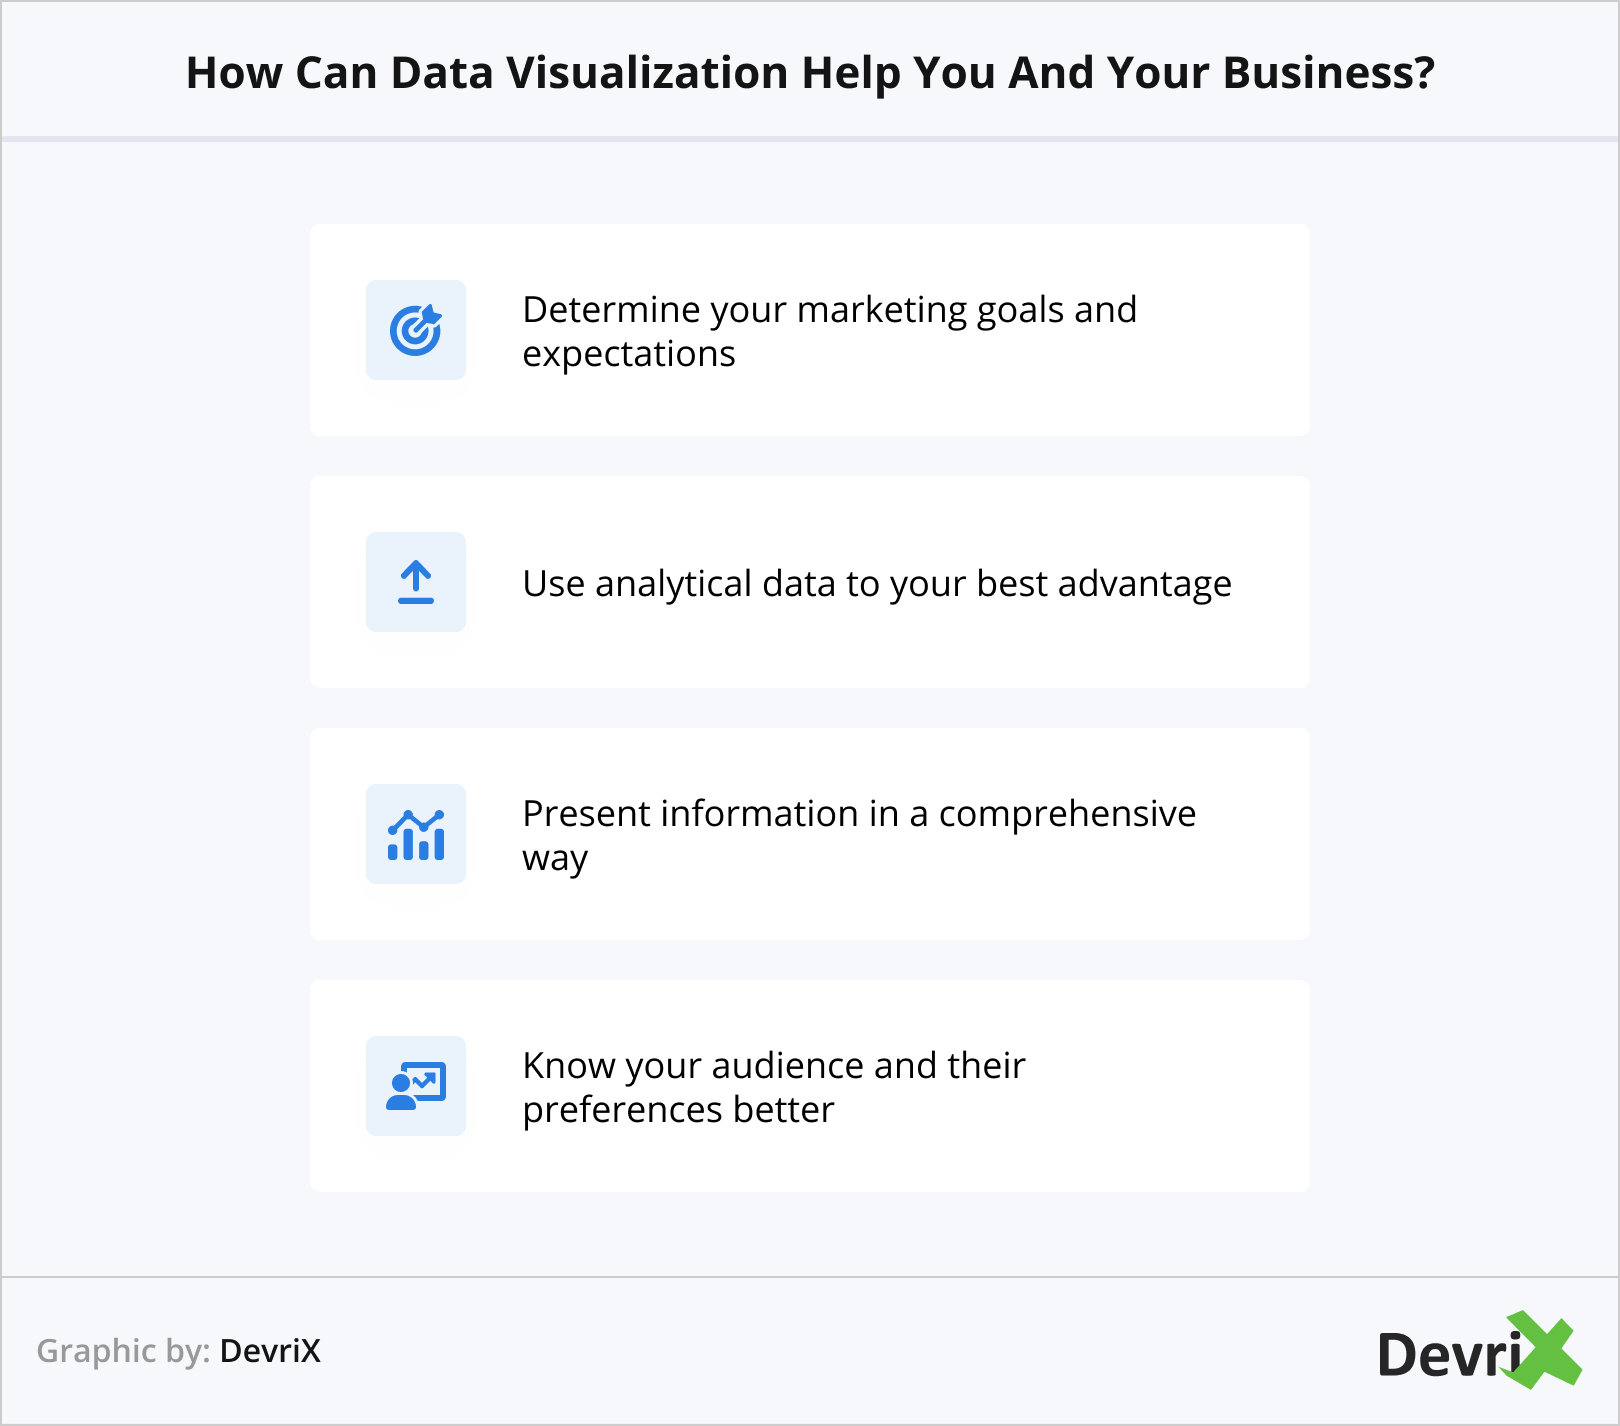 How Can Data Visualization Help You And Your Business